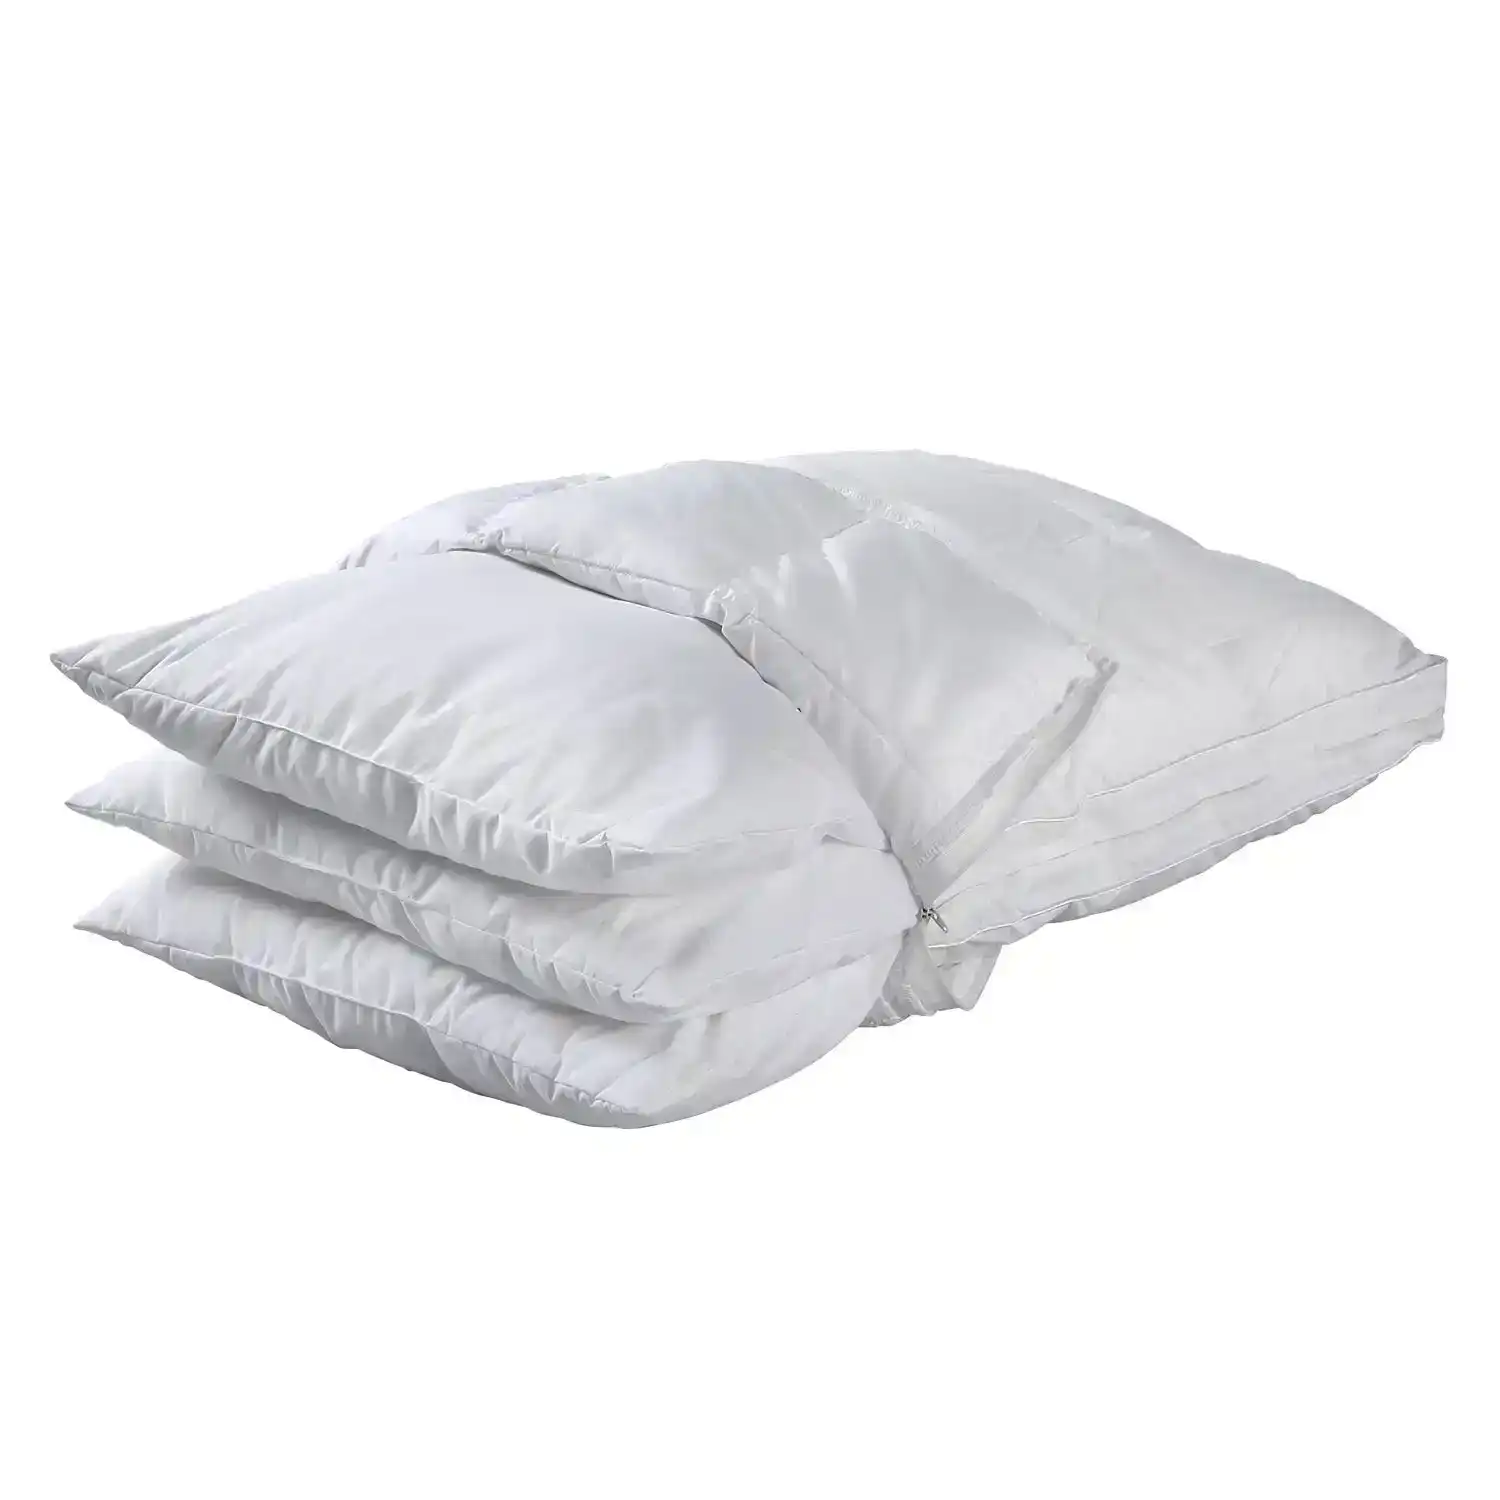 Bianca Bedding RELAX RIGHT PURE MICROFIBRE PILLOW 3 IN 1 ADJUSTABLE HEIGHT 1150G